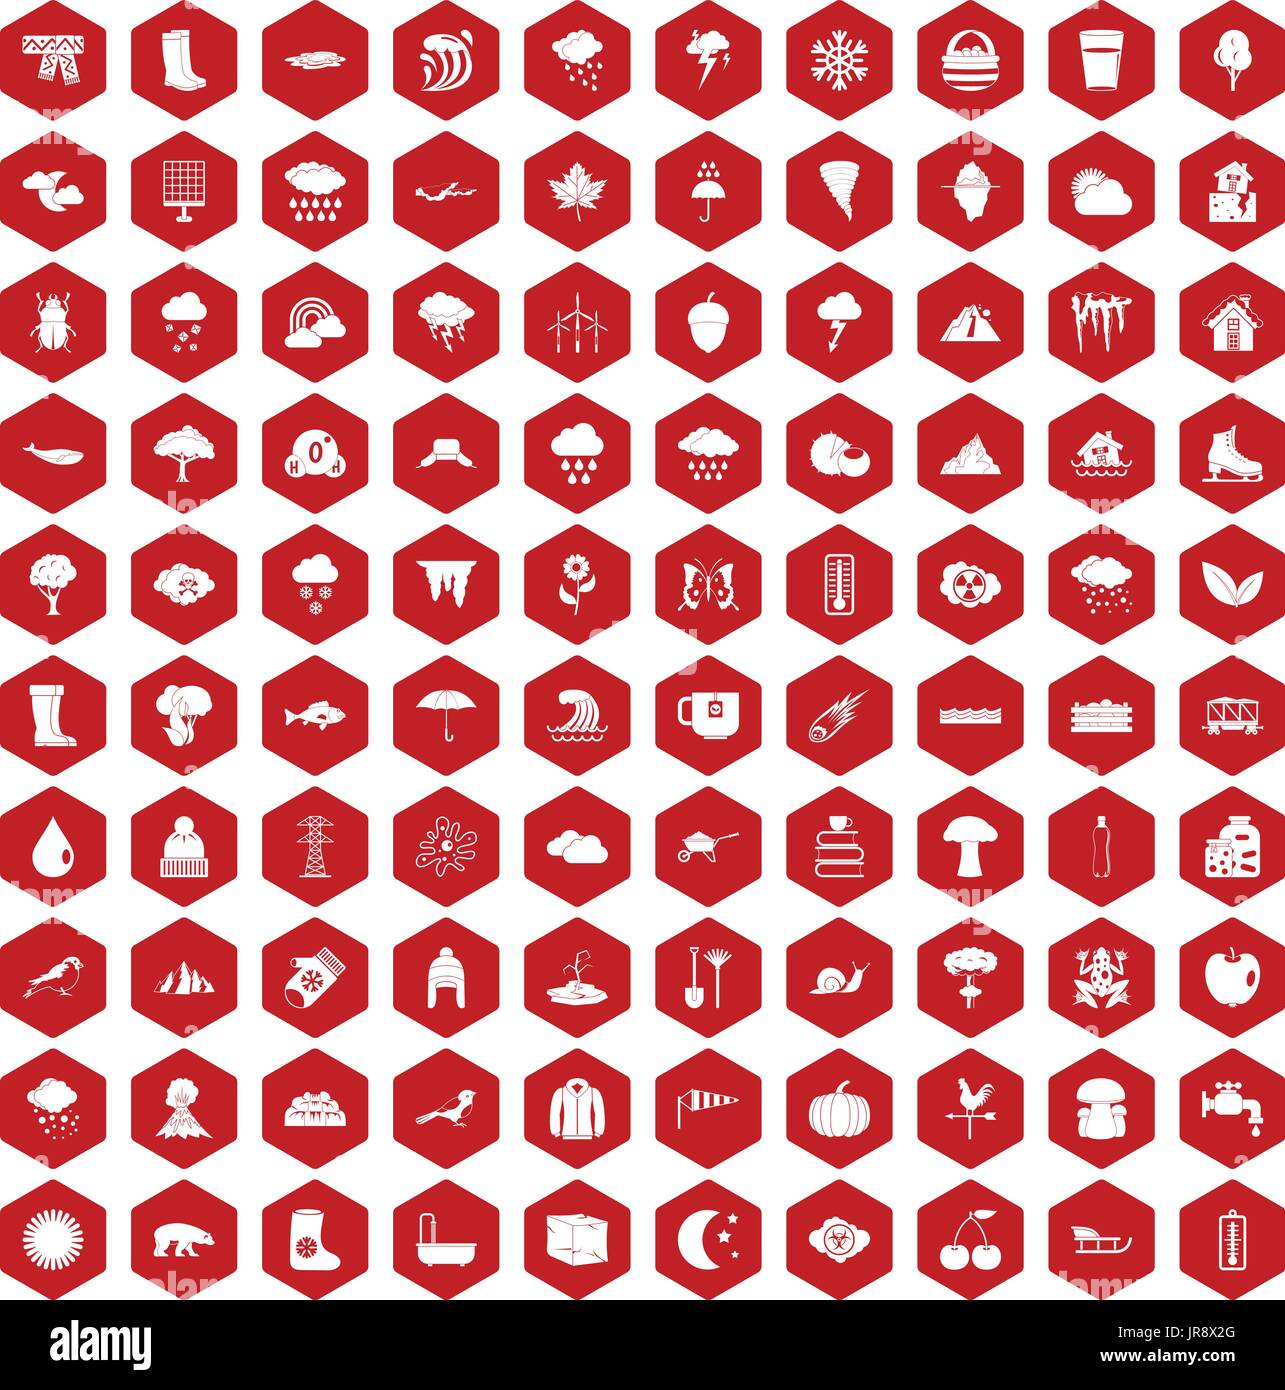 100 clouds icons hexagon red Stock Vector